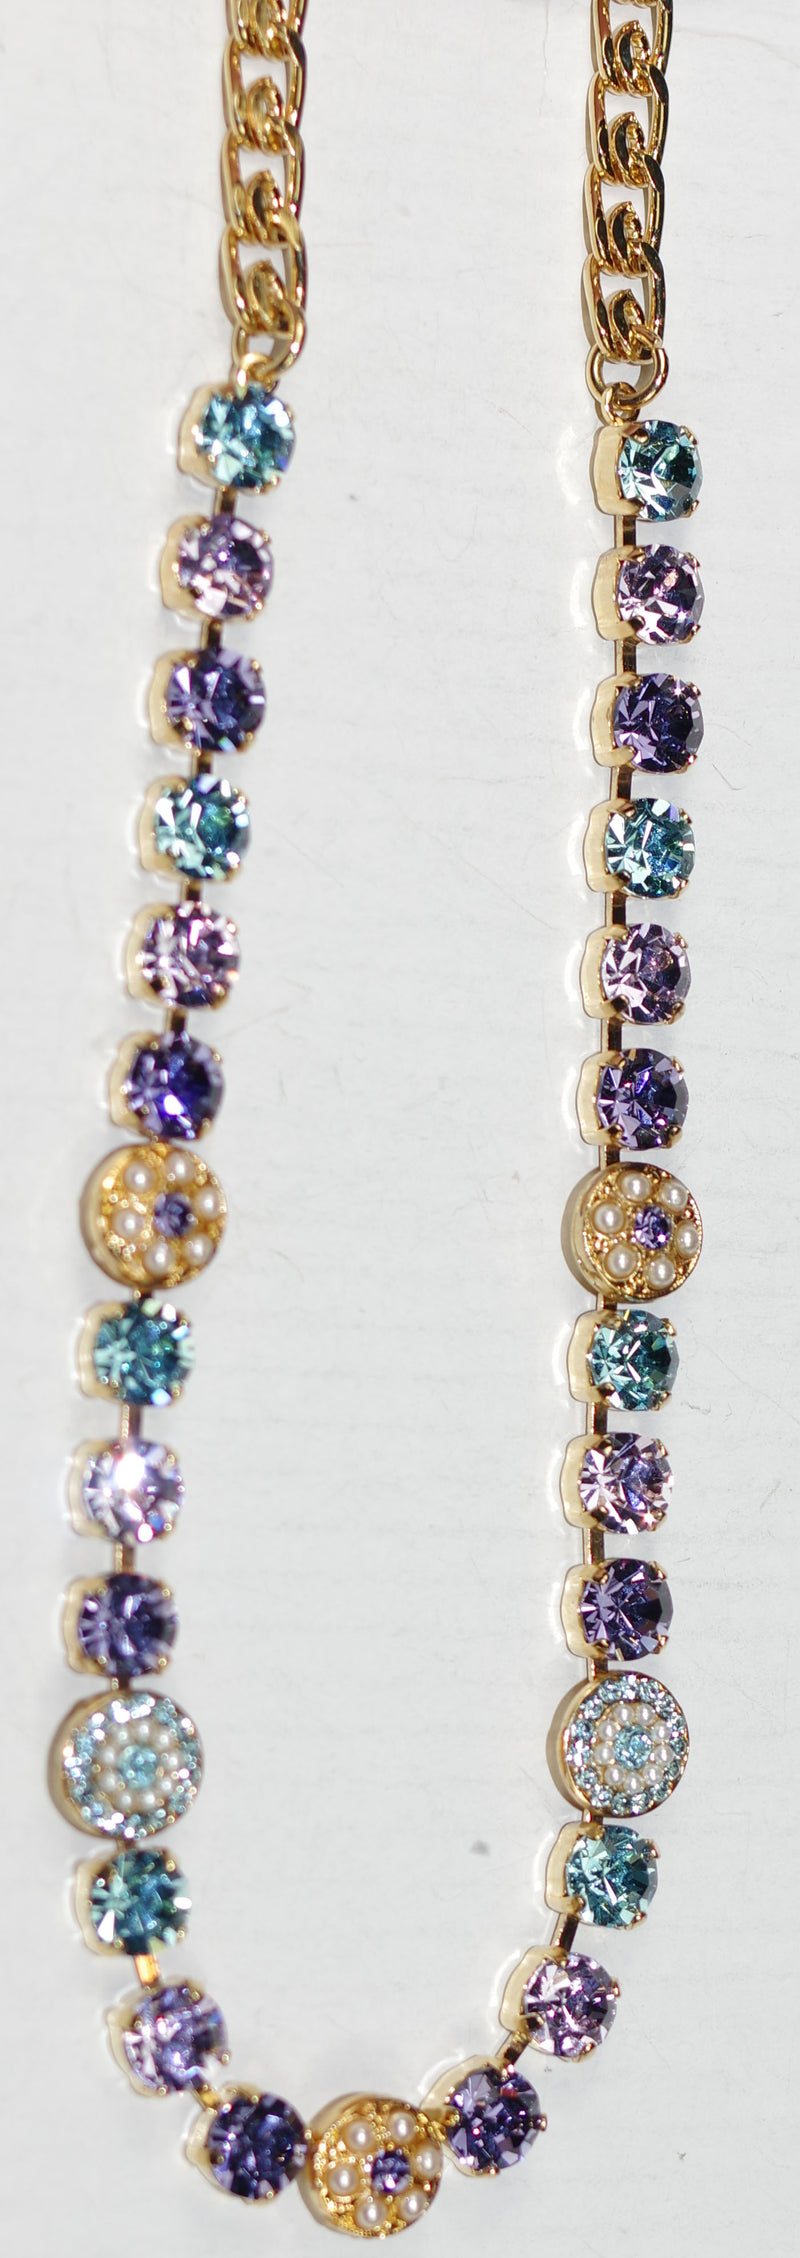 MARIANA NECKLACE BLUE MOON: lavender, blue, pearl stones in yellow gold setting, 17" adjustable chain